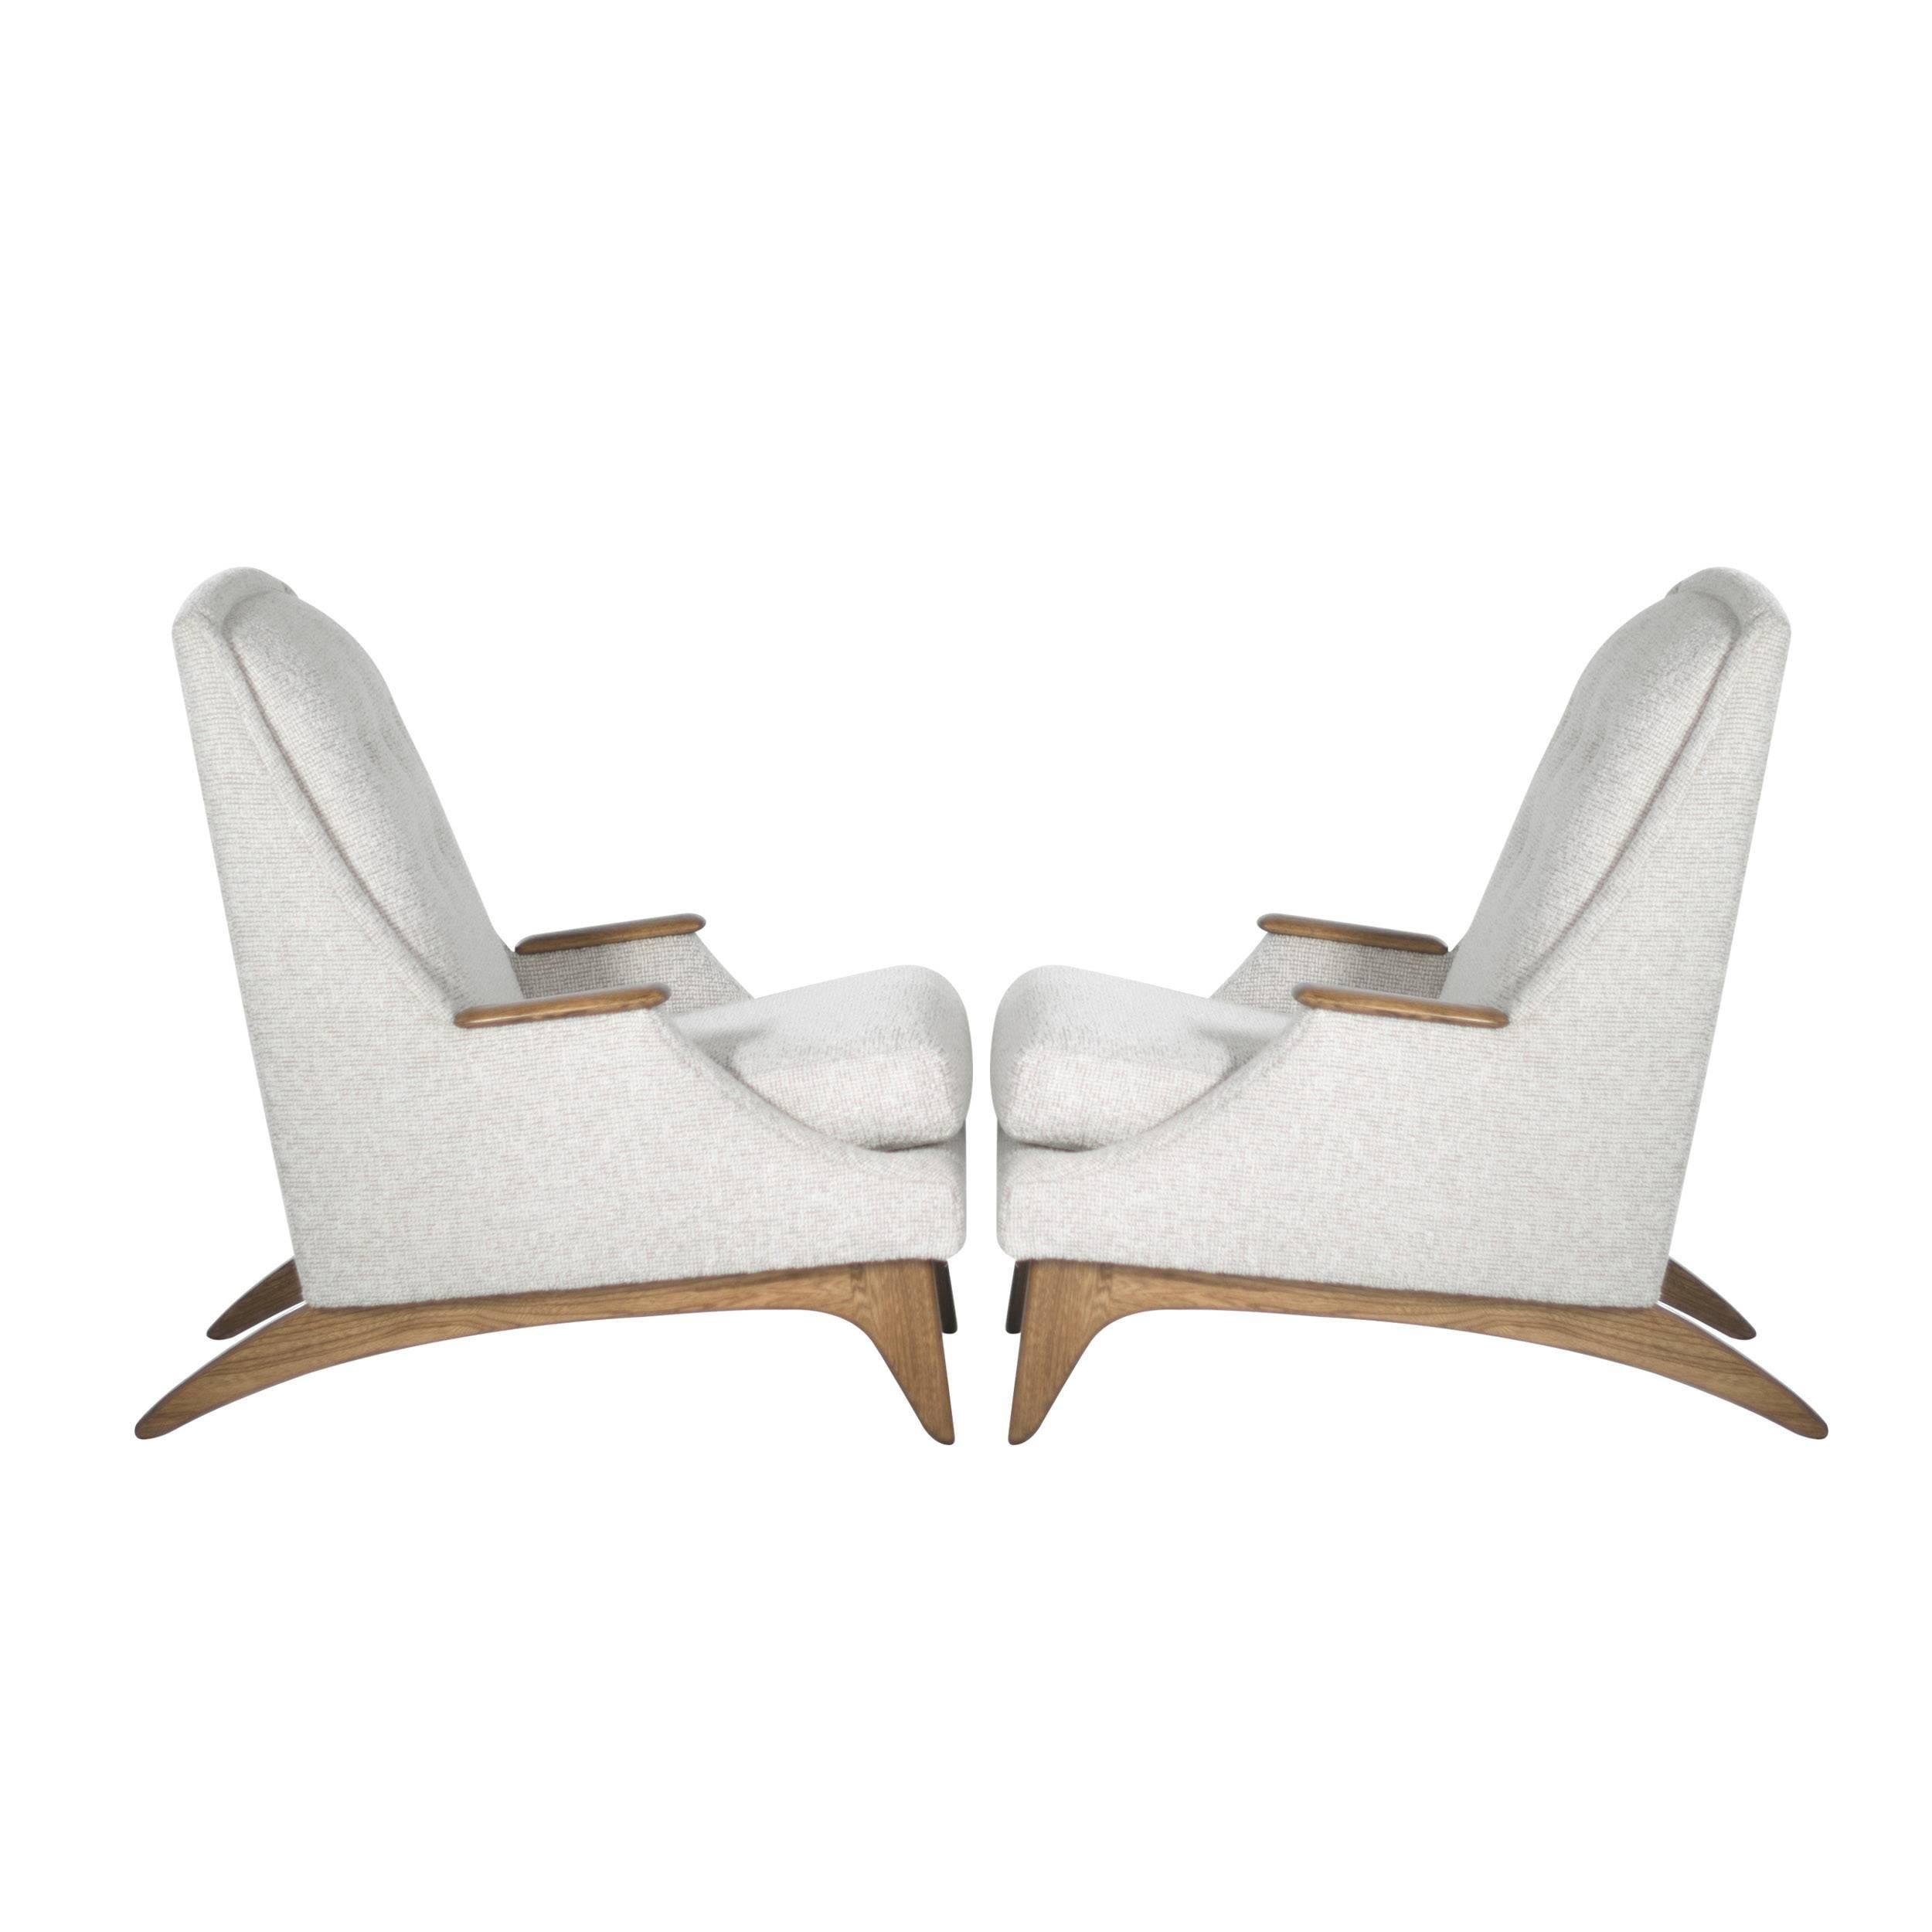 Sculptural Highback Lounge Chairs by Adrian Pearsall